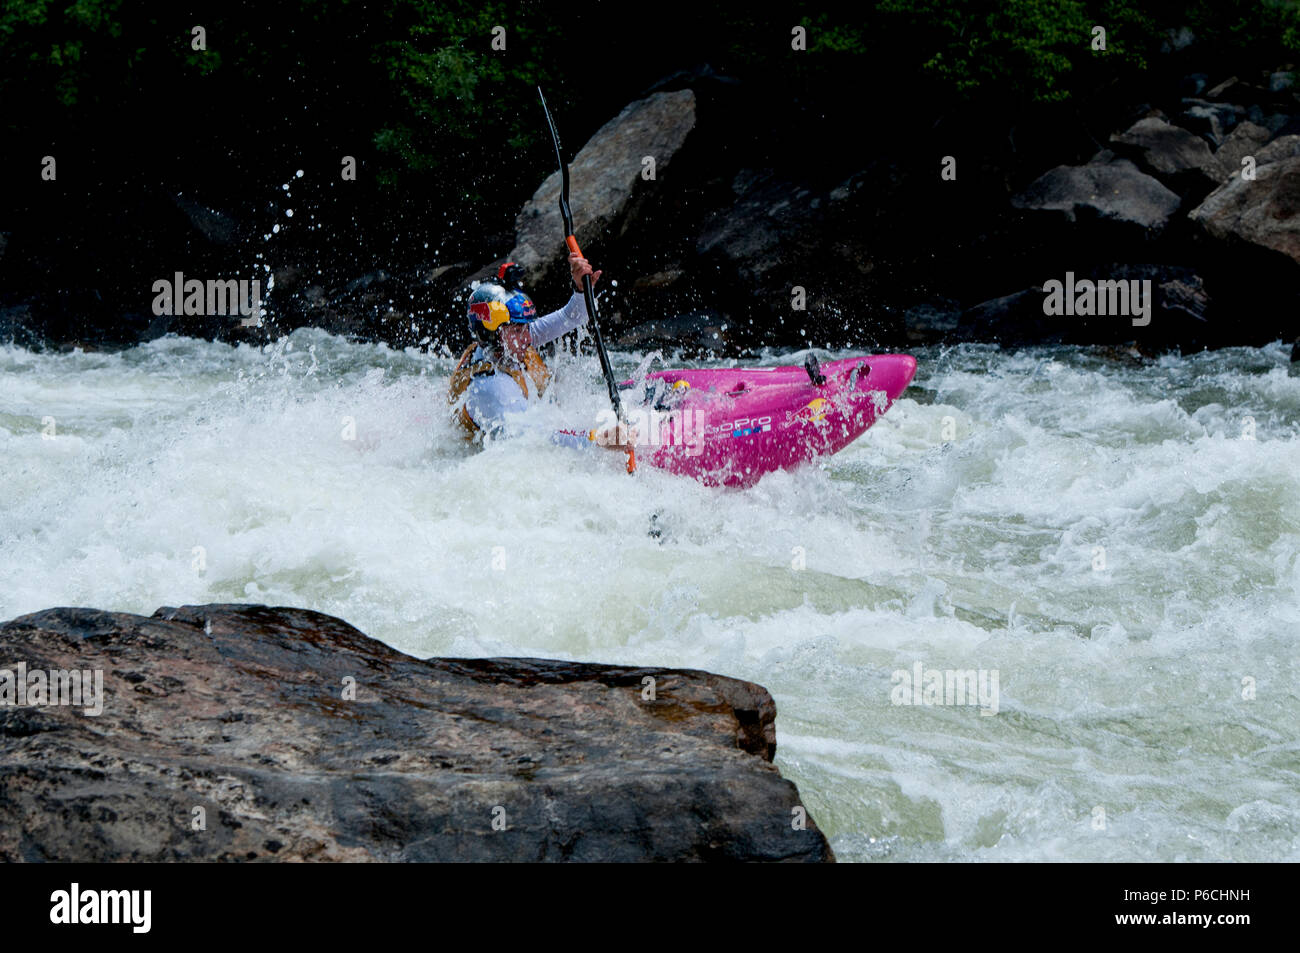 Kayaking on the North Fork Payette River in Jacobs Ladder class V rapid during the 2018 North Fork Championship Stock Photo